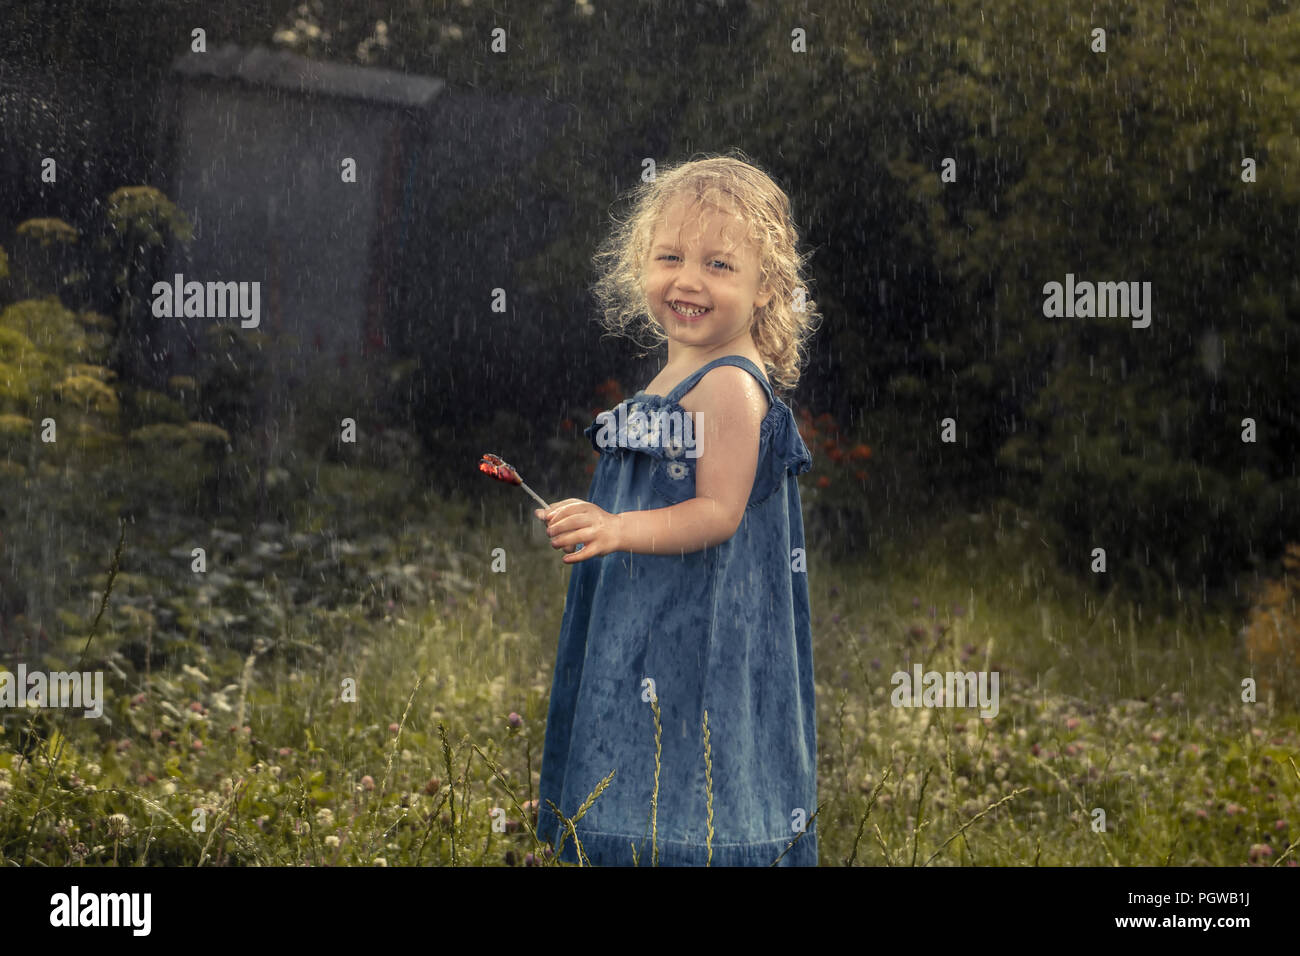 Happy cheerful child girl smiling under rain countryside concept happy carefree childhood in countryside Stock Photo